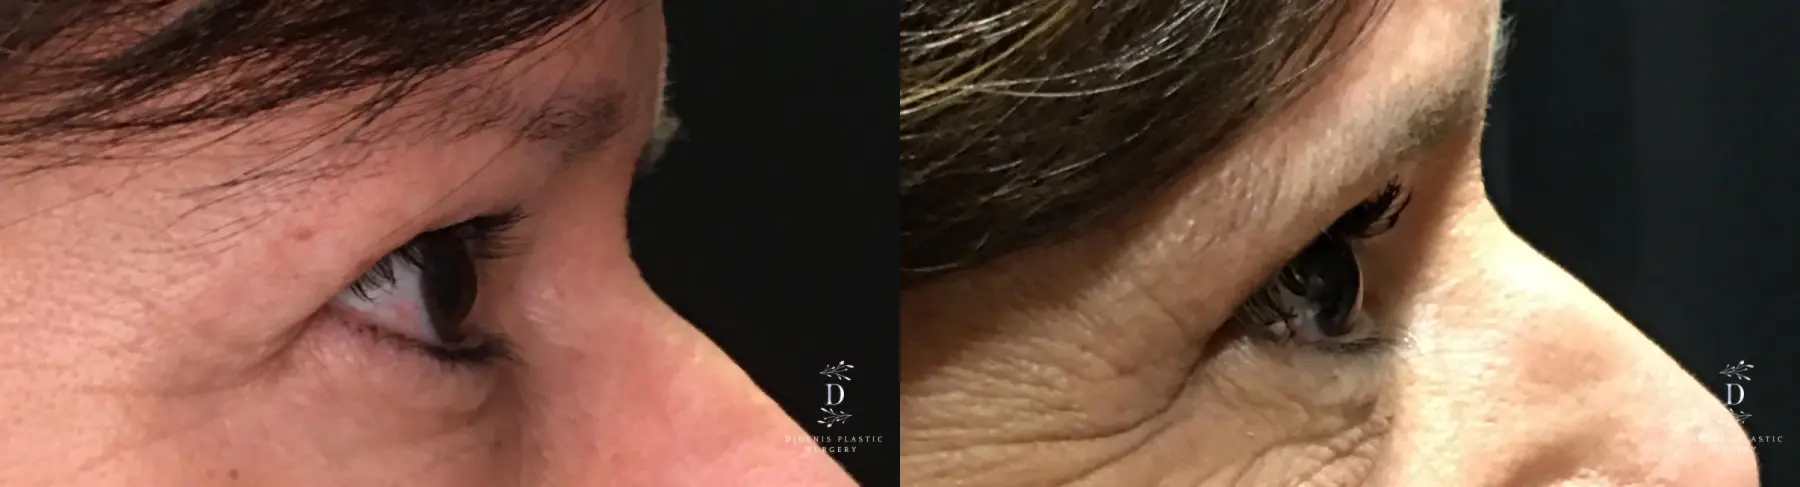 Eyelid Surgery: Patient 27 - Before and After 3